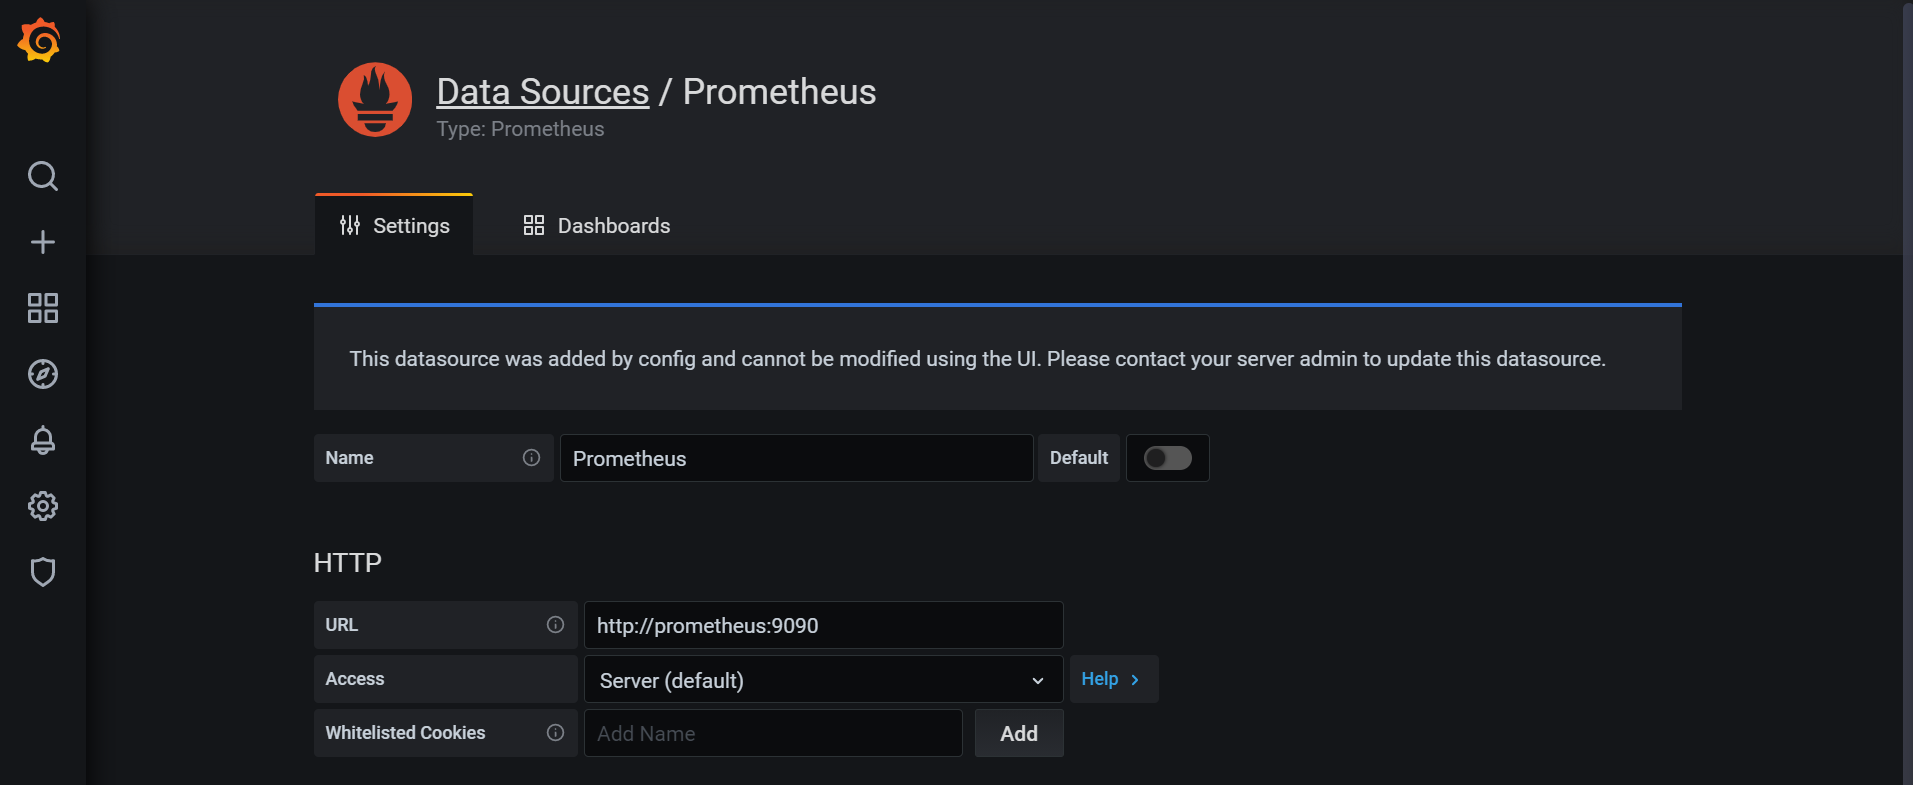 A screenshot of the Prometheus data source. The URL field contains the value of http://prometheus:9090